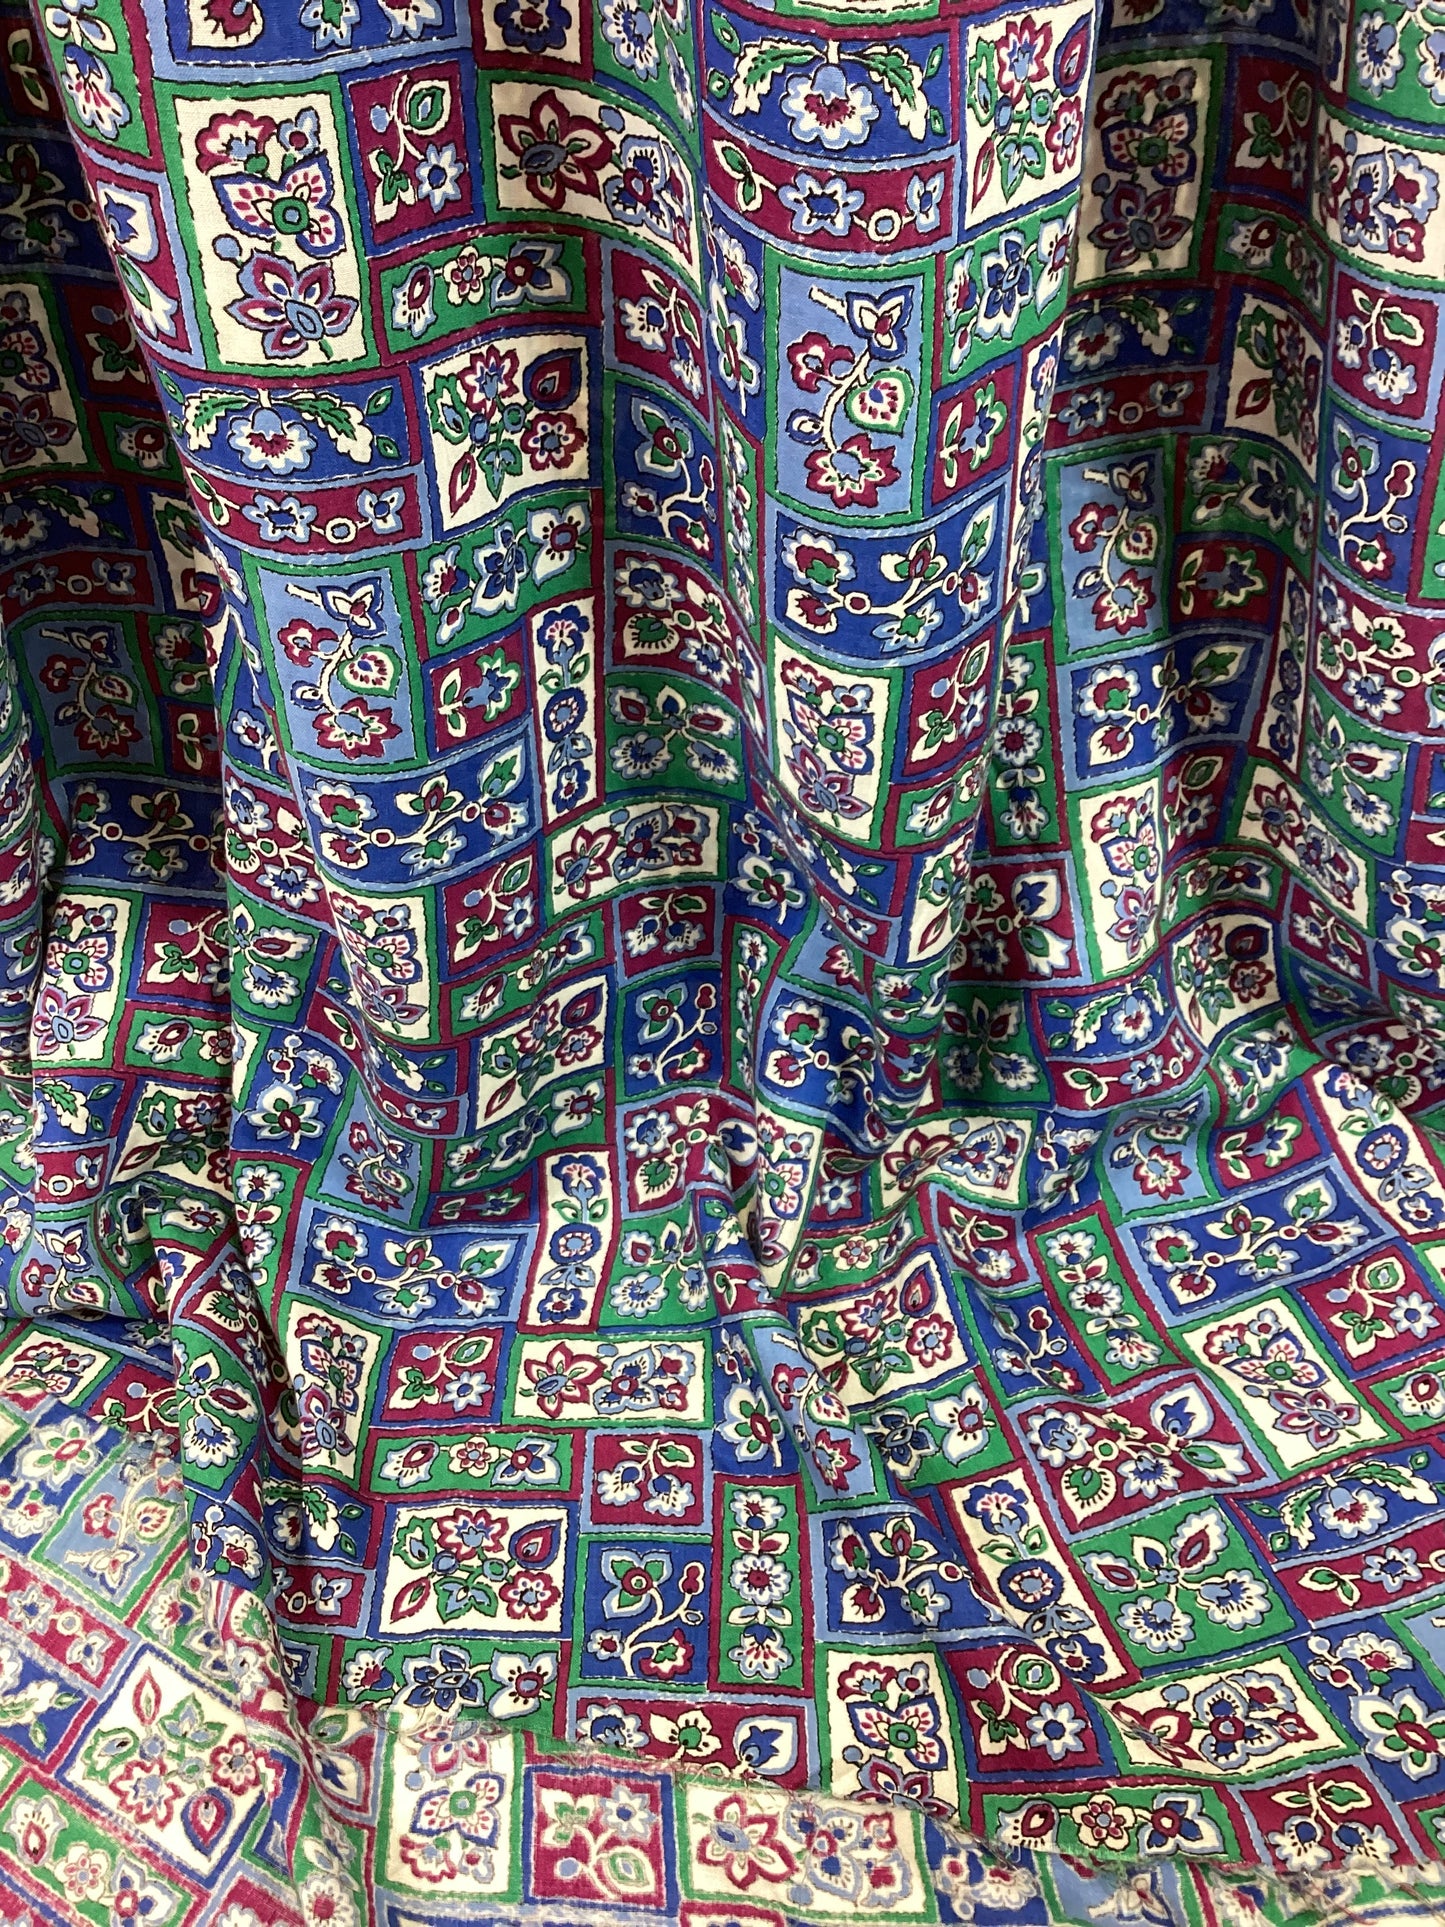 Original 1940’s/ 1950’s Abstract Dressmaking fabric - Magenta, Royal Blue, Pale blue, Jade, Green and white